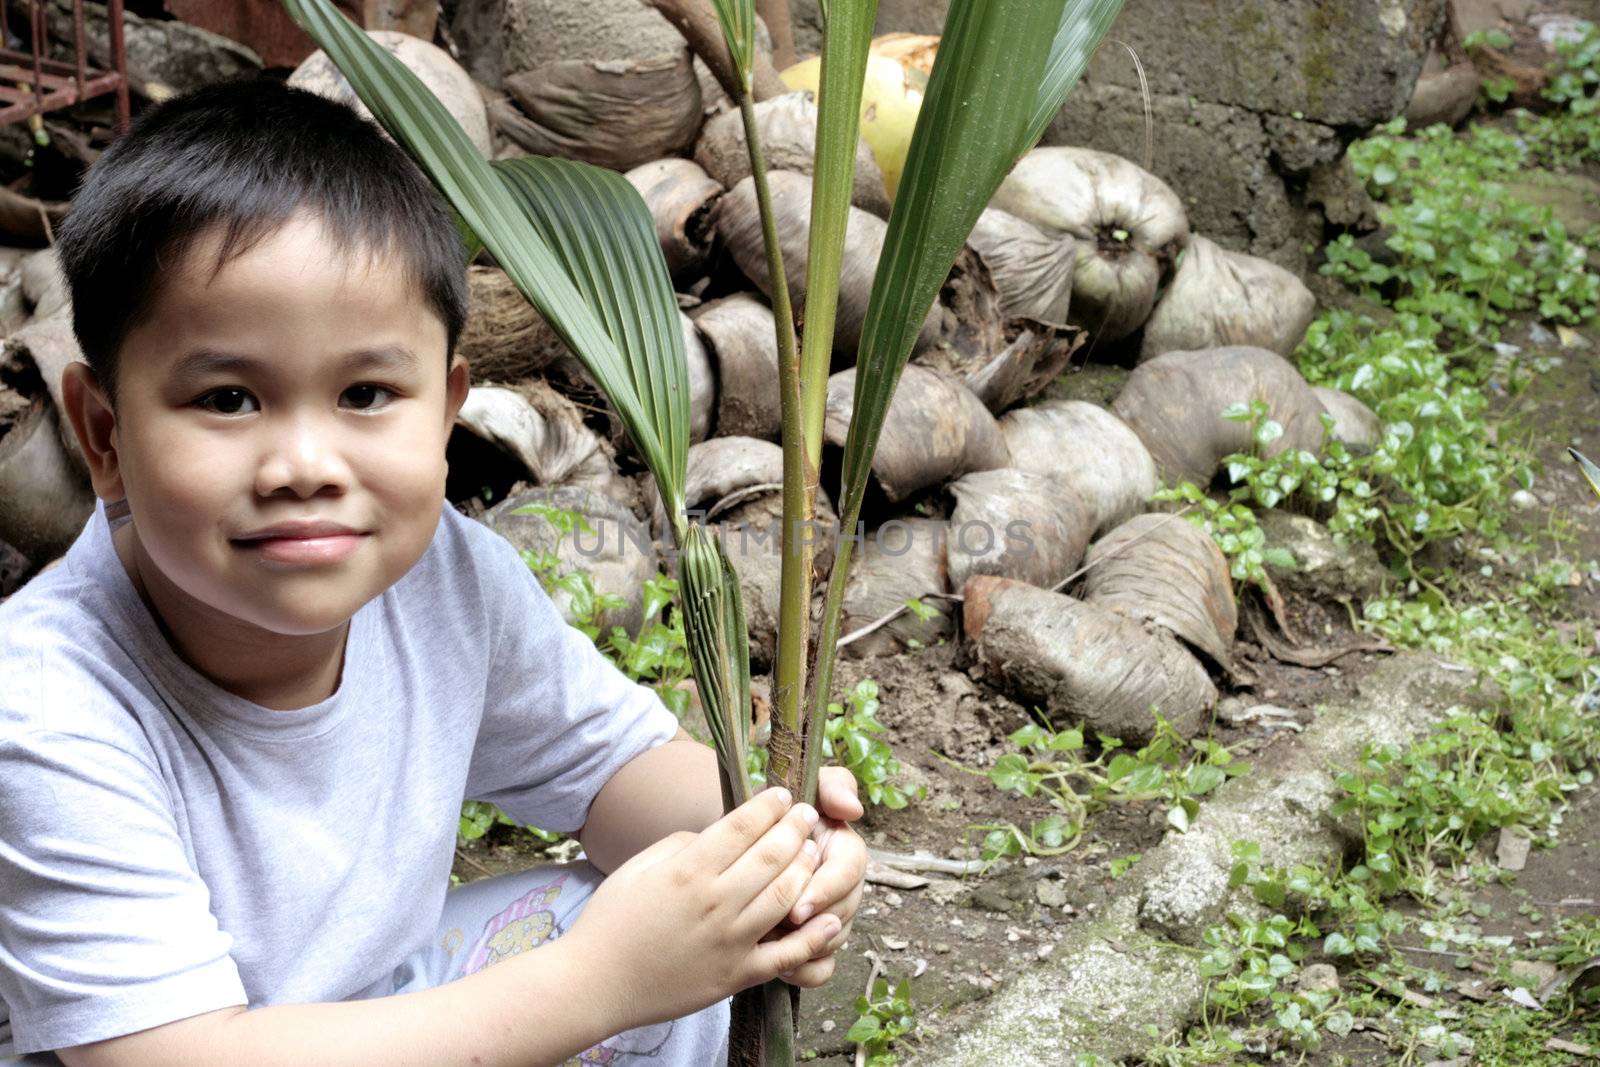 Child Holding a Coconut Seedling - metaphor for investment and future